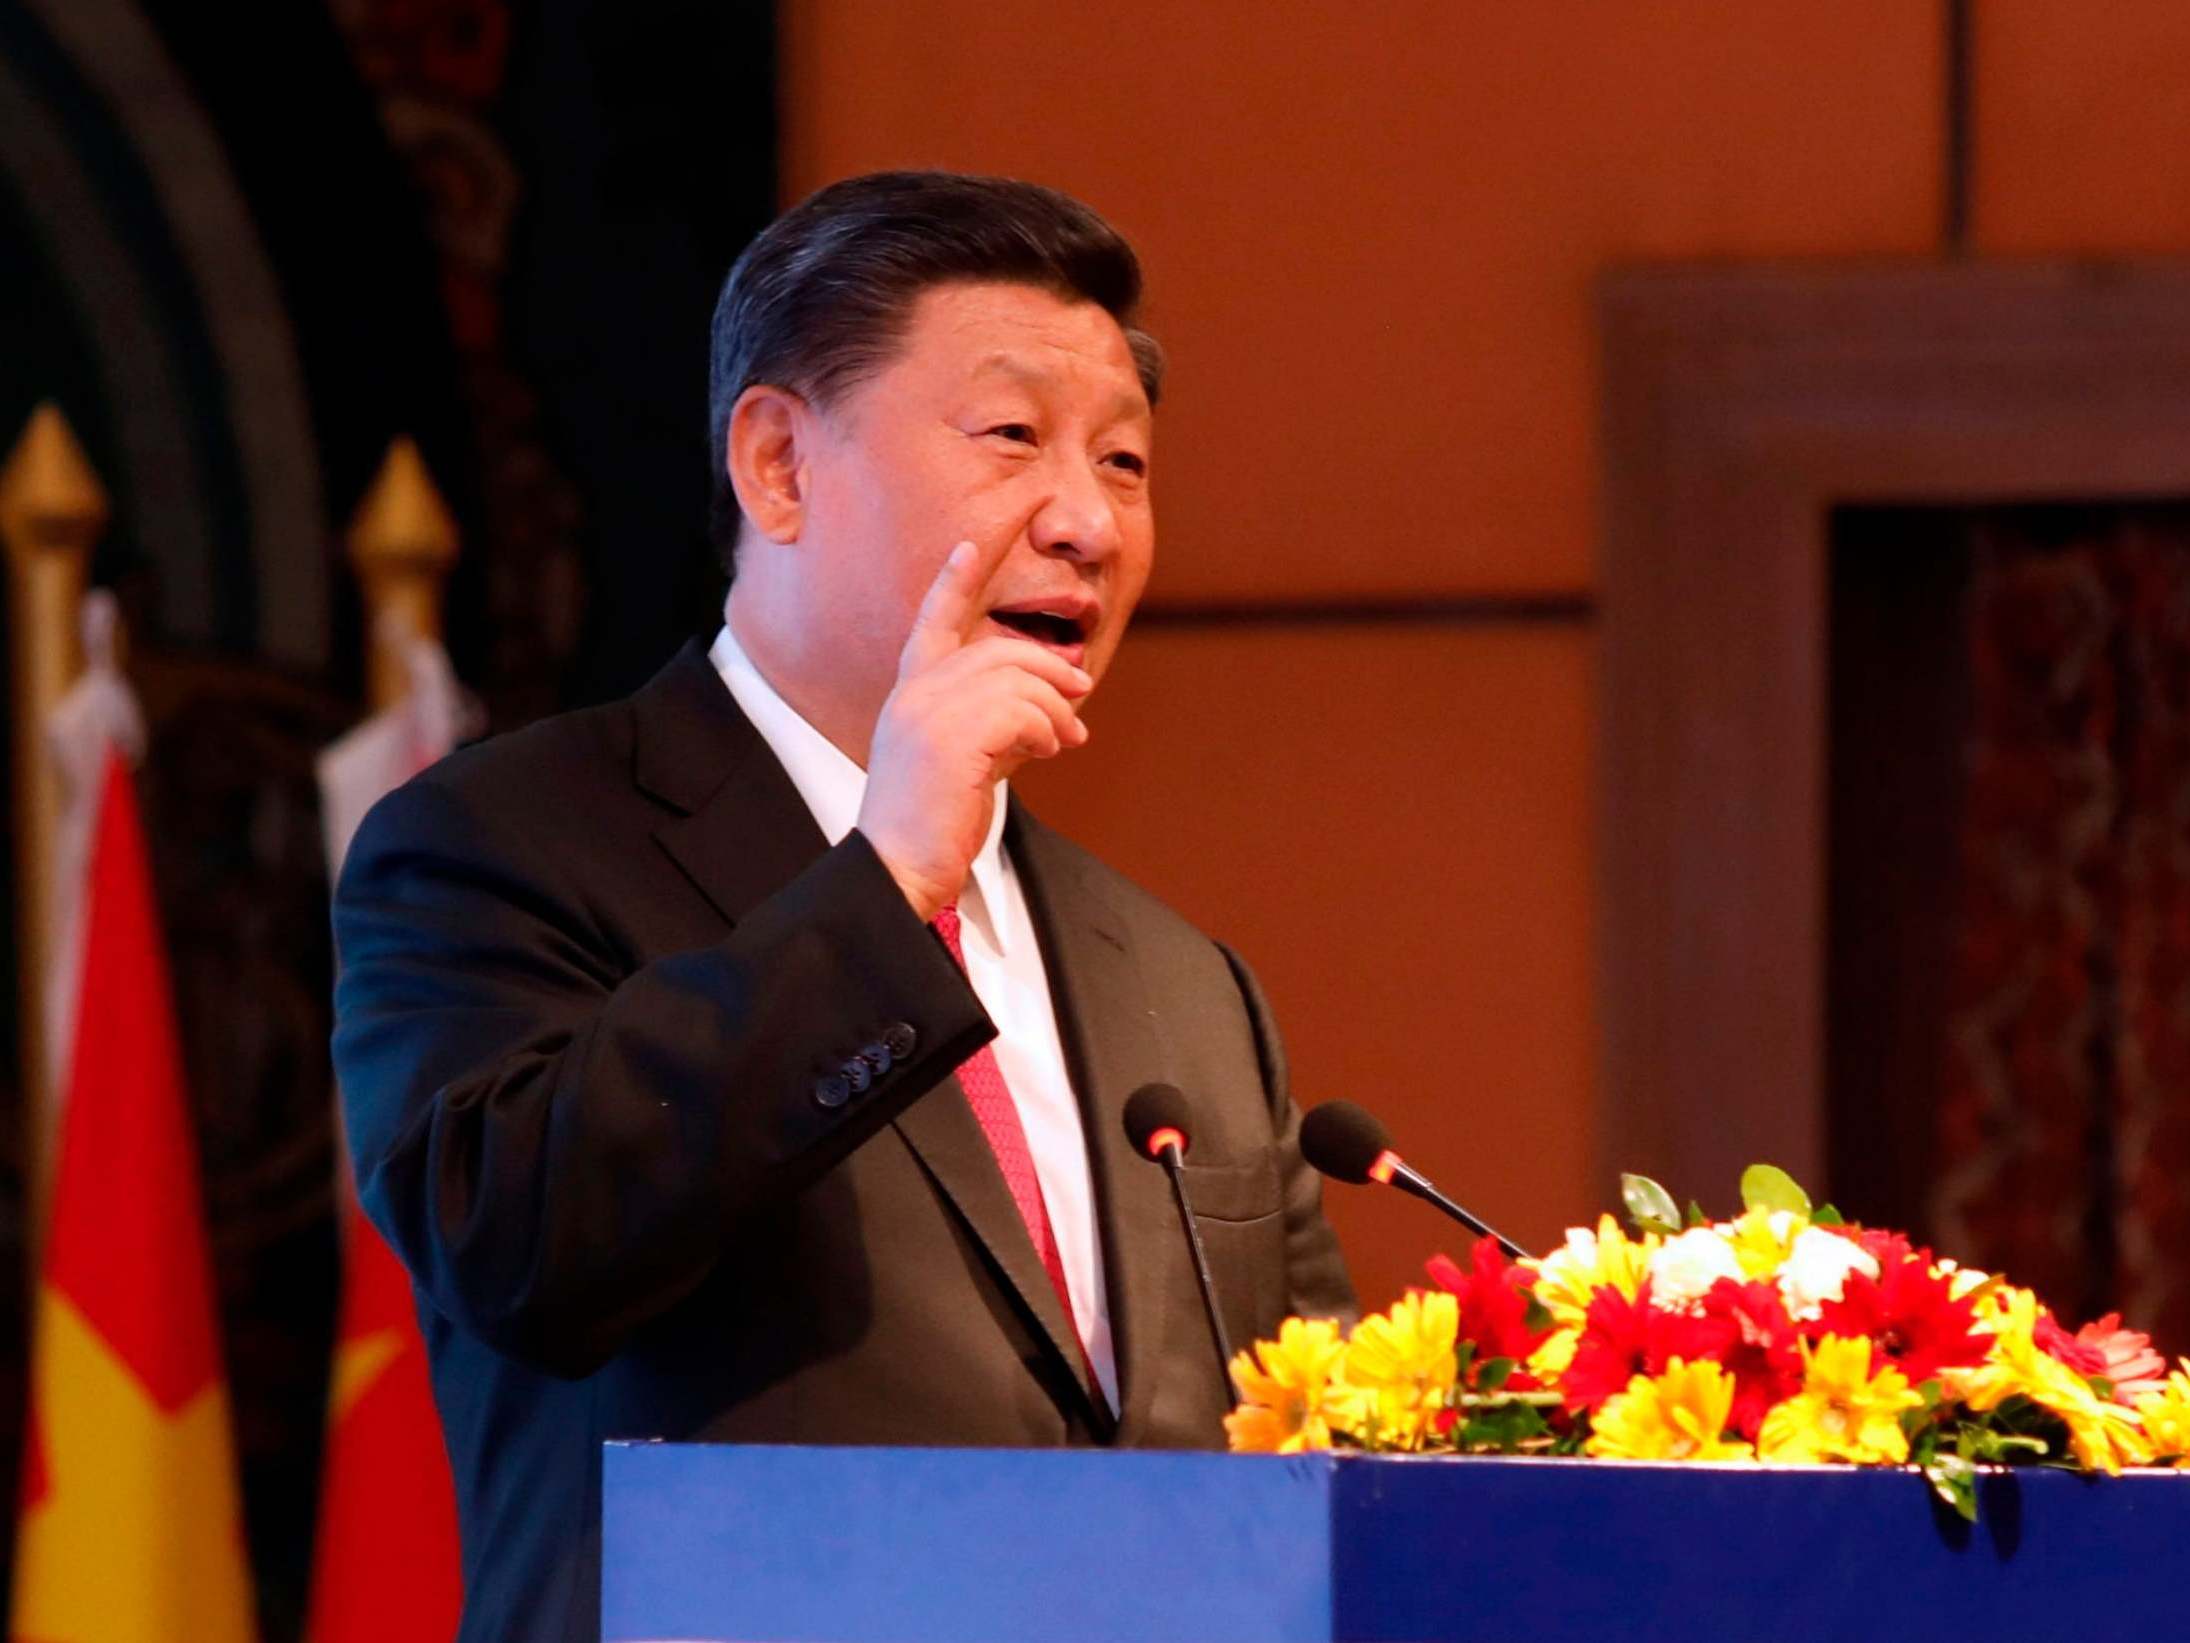 Beijing wants officials to promote so-called Xi Jinping Thought